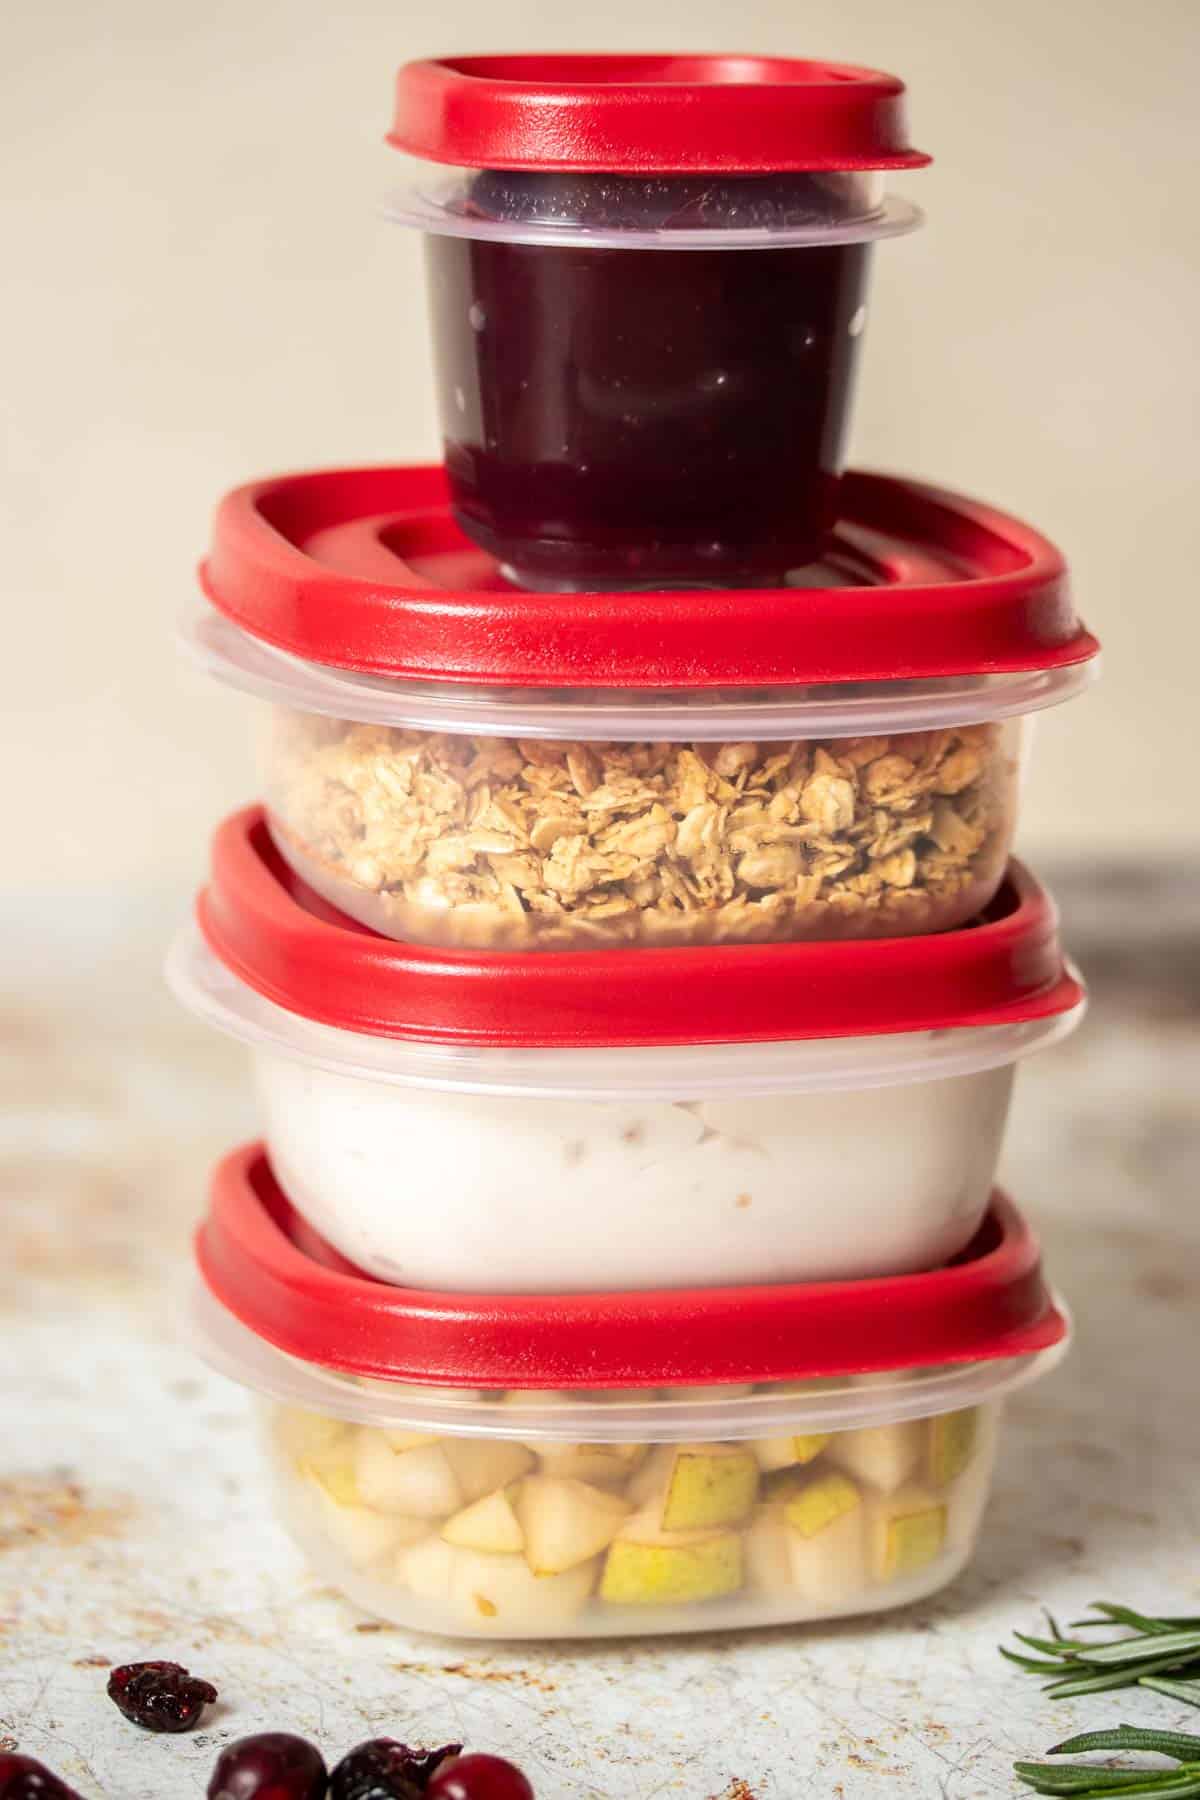 A pile of three large plastic containers with red tops and a smaller one on top, filled with fruit, yogurt, granola and jelly.